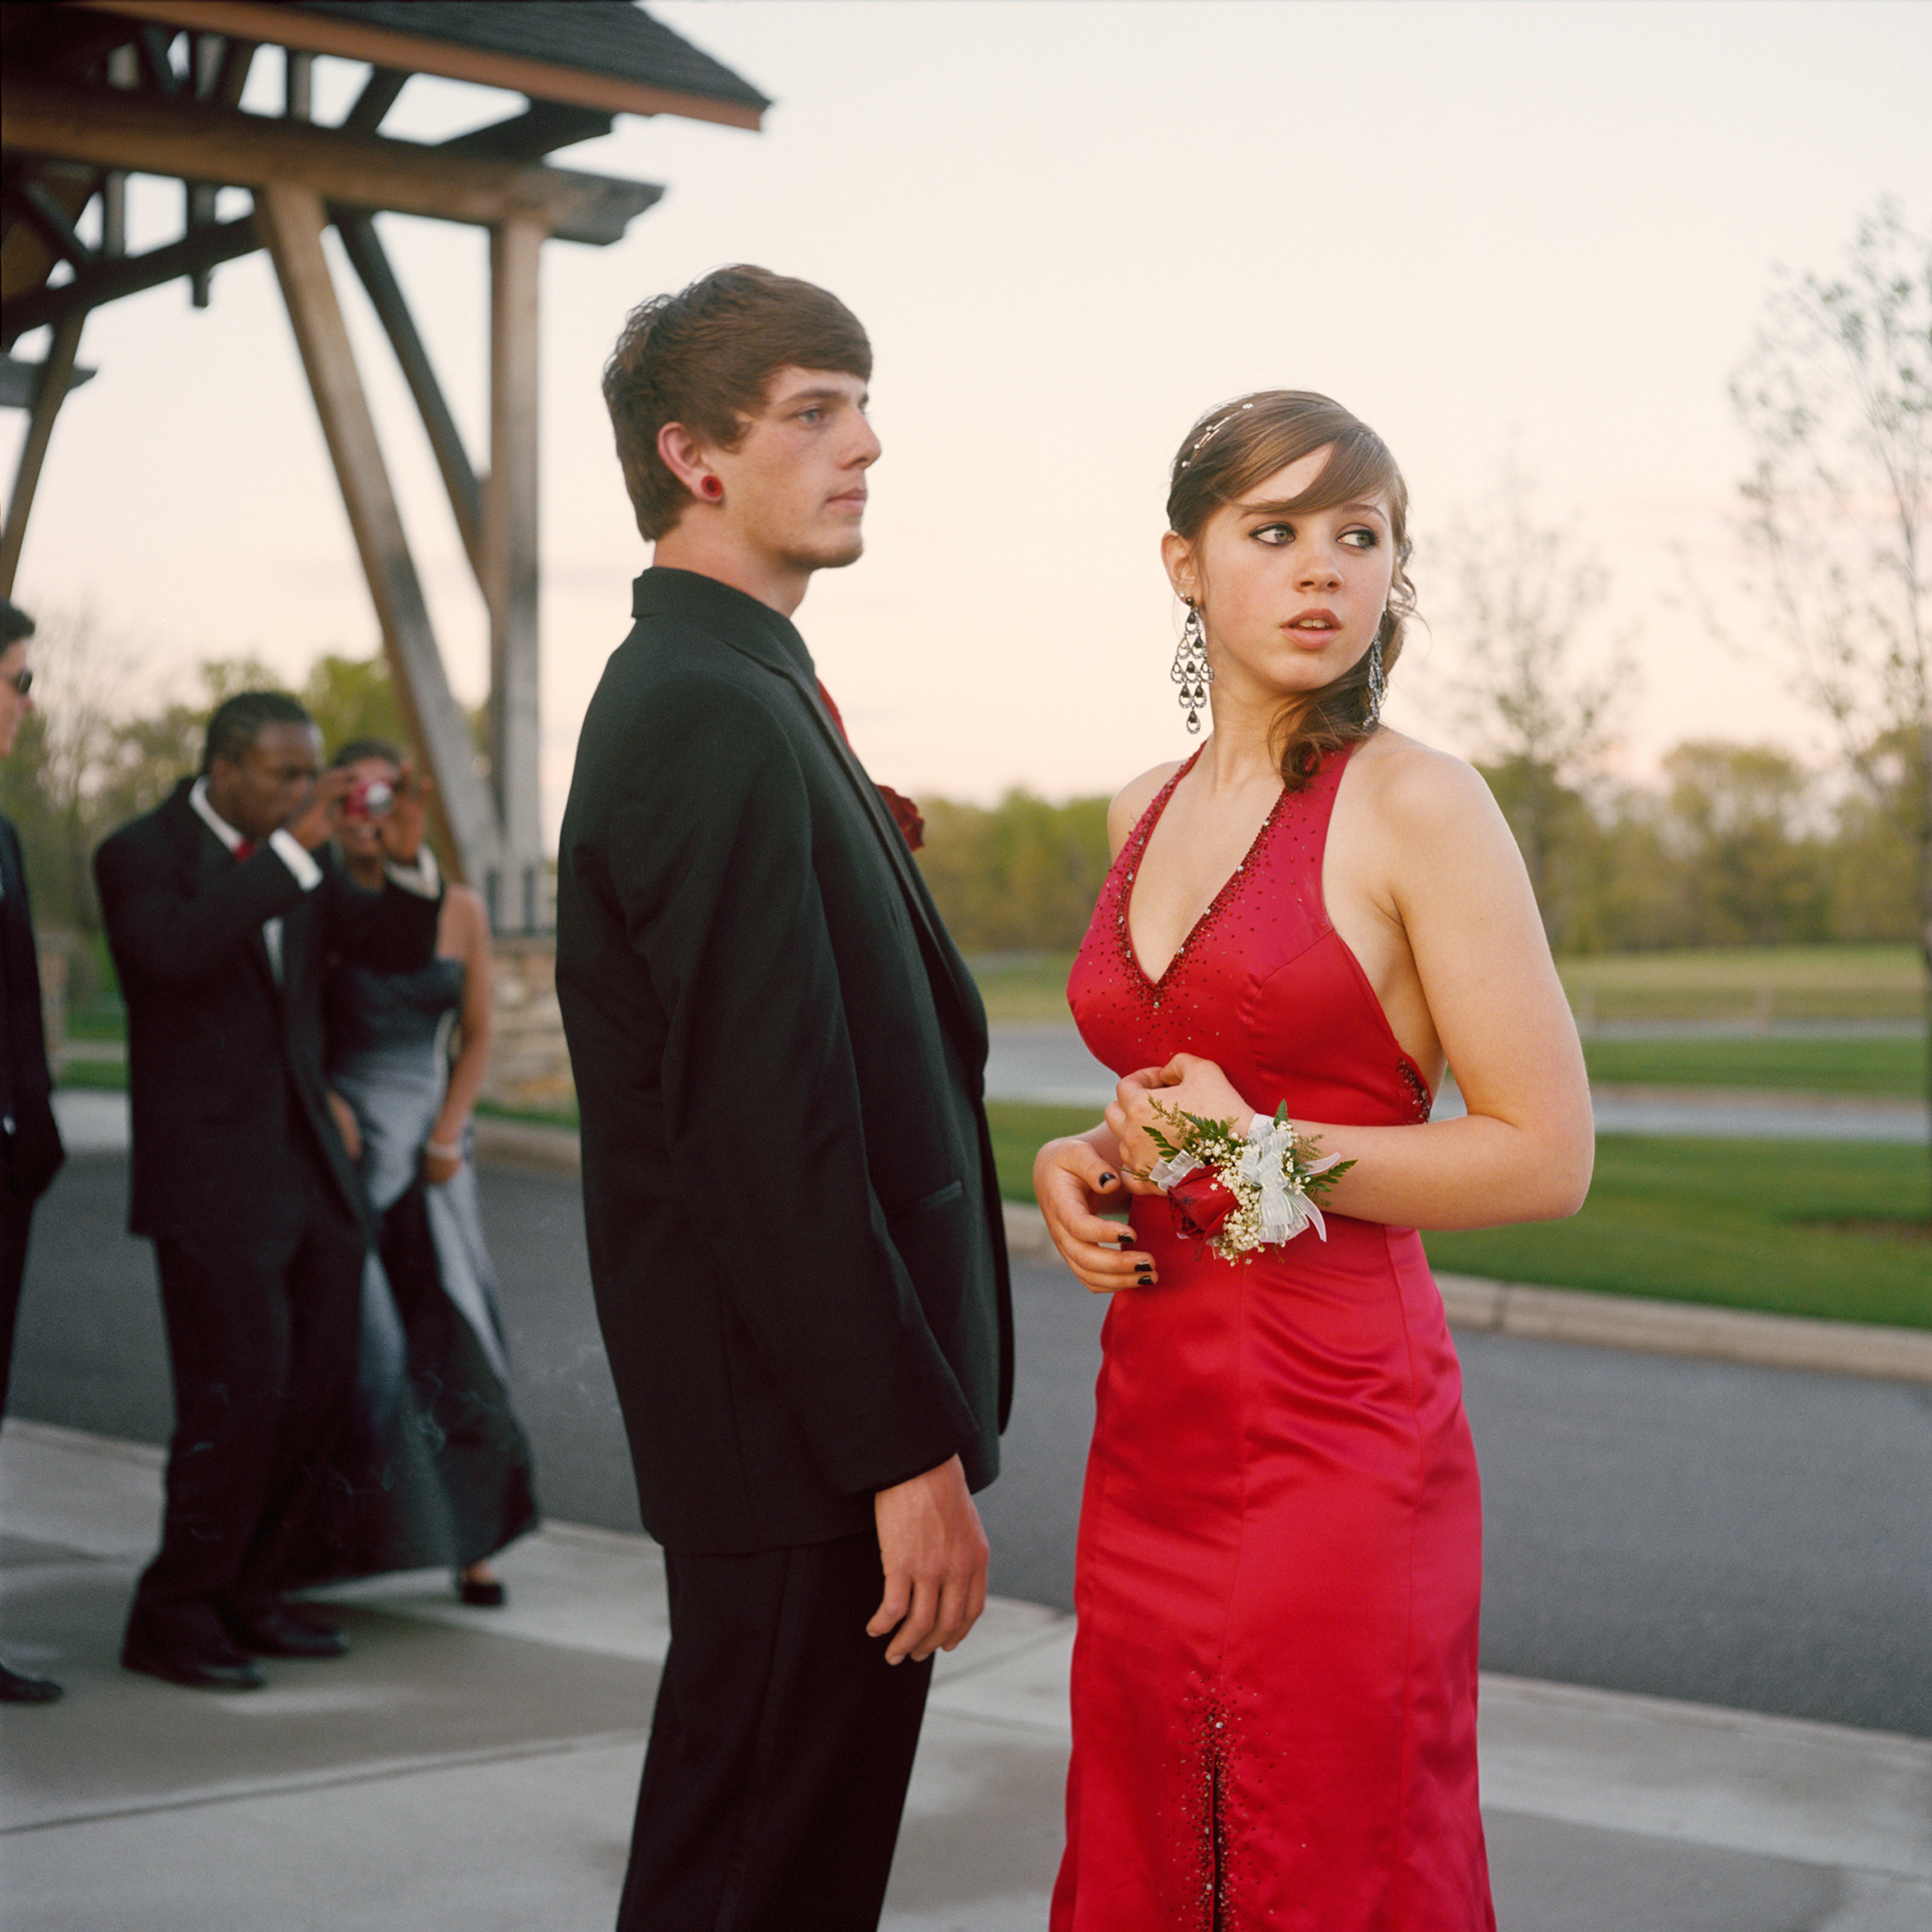 <strong>In 2014, the average cost for a prom dress was $195, according to <a href="http://www.statisticbrain.com/prom-night-statistics/" title="Statistic Brain" target="_blank">Seventeen Magazine</a>. On top of this, a teen girl's prom expenses include shoes, handbag, hair, makeup, manicure and jewelry.  However, teen boys are often expected to bear the costs for many prom activities, and the average costs of a limousine for four hours can be $450 and prom tickets can be $75.  This excludes his tuxedo, accessories, their dinner and transportation. For help making a budget, get the <a href="http://www.practicalmoneyskills.com/resources/prom2014.php" title="Visa Plan'it Prom app" target="_blank">Visa Plan'it Prom app</a>.</strong>
                                            
                                            Title: "Nick and Angel," from the series <em><a href="http://amyandersonart.com/crossroads.htm" title="At Risk, With Promise" target="_blank">At Risk, With Promise.</a></em>
                                            
                                            <a href="http://amyandersonart.com/" title="Amy Anderson" target="_blank">Amy Anderson</a> has been documenting students at Crossroads Alternative High School for the last four years. Coming from diverse backgrounds, they have been unable to be successful in a traditional school setting for various reasons. Some are brilliant, kind, articulate teenagers; some are abused, addicted, angry youth…many are both. Though they carry the wounds and fears of their past, her portraits honor the strength that develops as they begin a new journey and make changes and choices that will shape their lives.